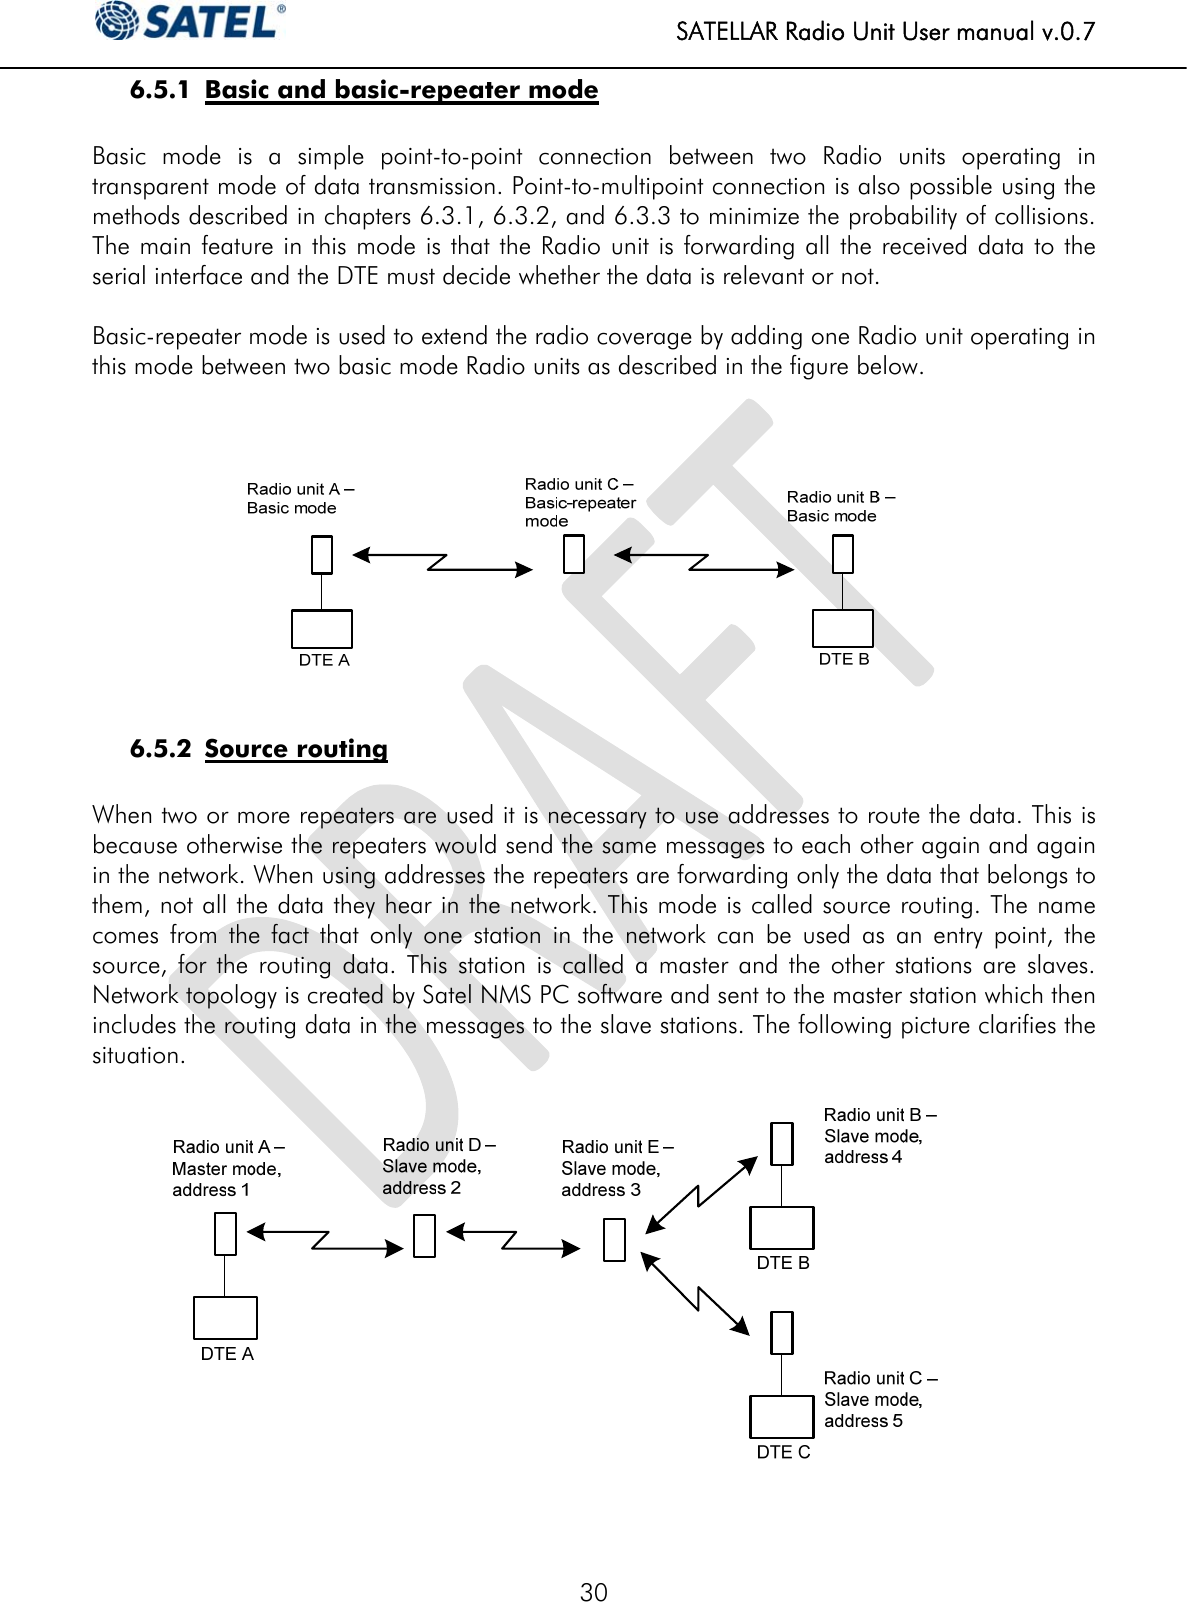   SATELLAR Radio Unit User manual v.0.7  30 6.5.1 Basic and basic-repeater mode  Basic mode is a simple point-to-point connection between two Radio units operating in transparent mode of data transmission. Point-to-multipoint connection is also possible using the methods described in chapters 6.3.1, 6.3.2, and 6.3.3 to minimize the probability of collisions. The main feature in this mode is that the Radio unit is forwarding all the received data to the serial interface and the DTE must decide whether the data is relevant or not.  Basic-repeater mode is used to extend the radio coverage by adding one Radio unit operating in this mode between two basic mode Radio units as described in the figure below.      6.5.2 Source routing  When two or more repeaters are used it is necessary to use addresses to route the data. This is because otherwise the repeaters would send the same messages to each other again and again in the network. When using addresses the repeaters are forwarding only the data that belongs to them, not all the data they hear in the network. This mode is called source routing. The name comes from the fact that only one station in the network can be used as an entry point, the source, for the routing data. This station is called a master and the other stations are slaves. Network topology is created by Satel NMS PC software and sent to the master station which then includes the routing data in the messages to the slave stations. The following picture clarifies the situation.    